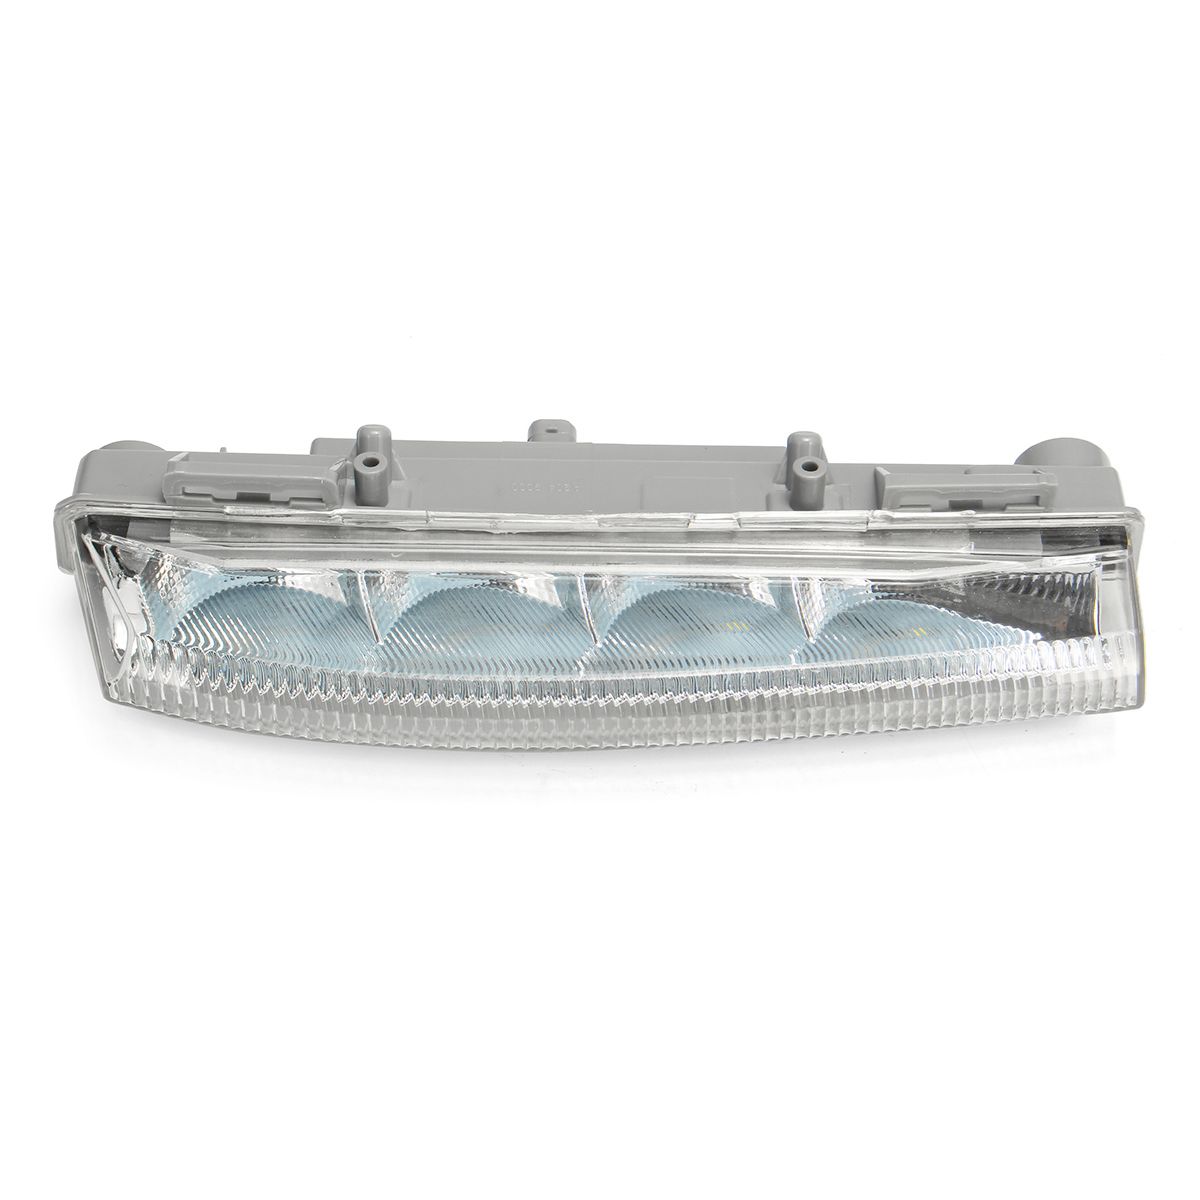 Car-LED-Front-DRL-Fog-Lights-LeftRight-for-Mercedes-Benz-W204-W212-C250-C280-C350-E350-A2049068900-A-1460320